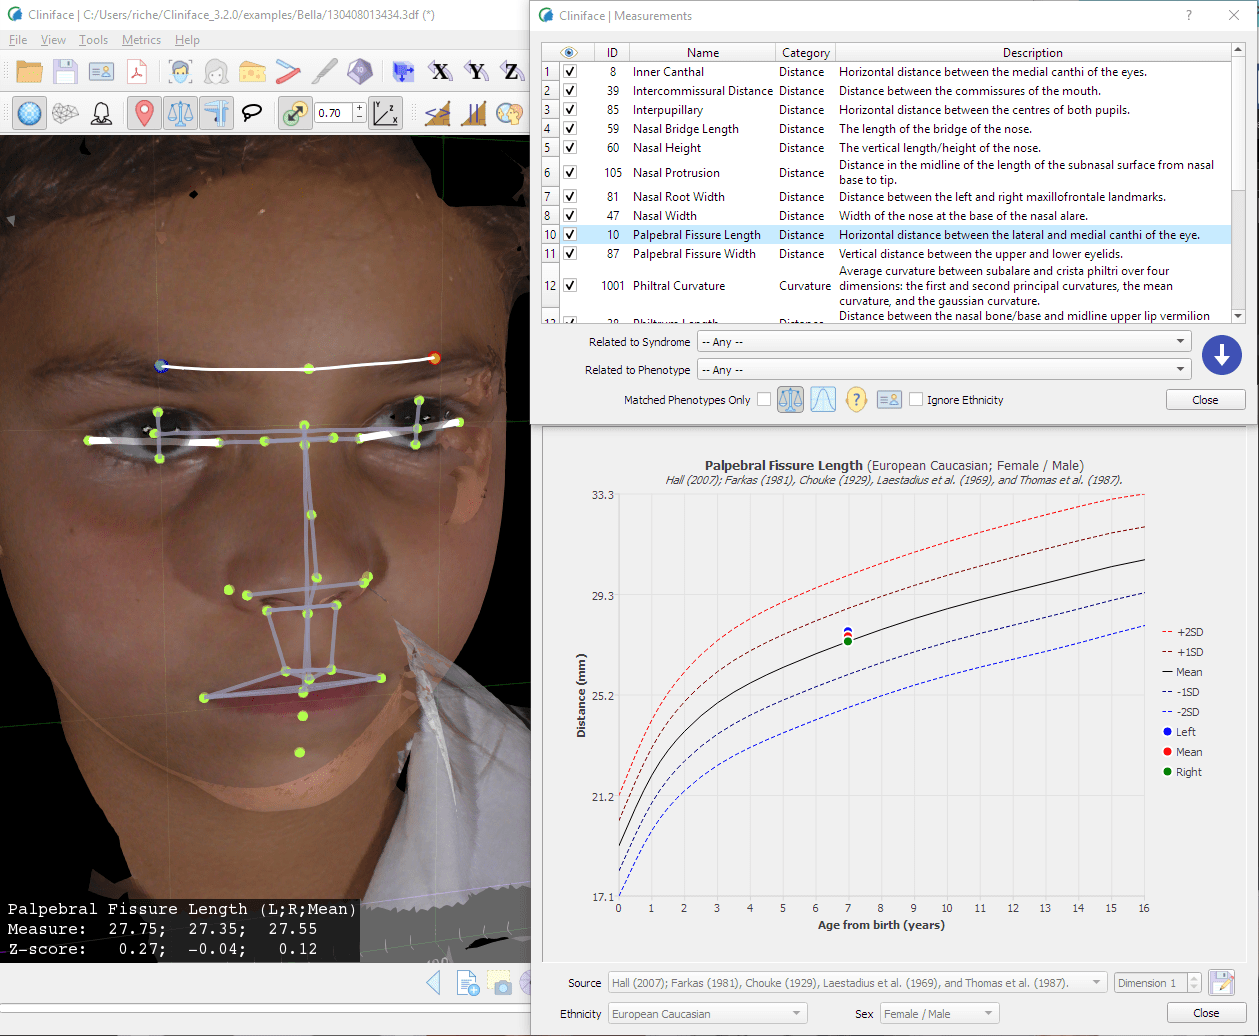 Cliniface: Open source 3D Facial Image Visualization and Analysis Software